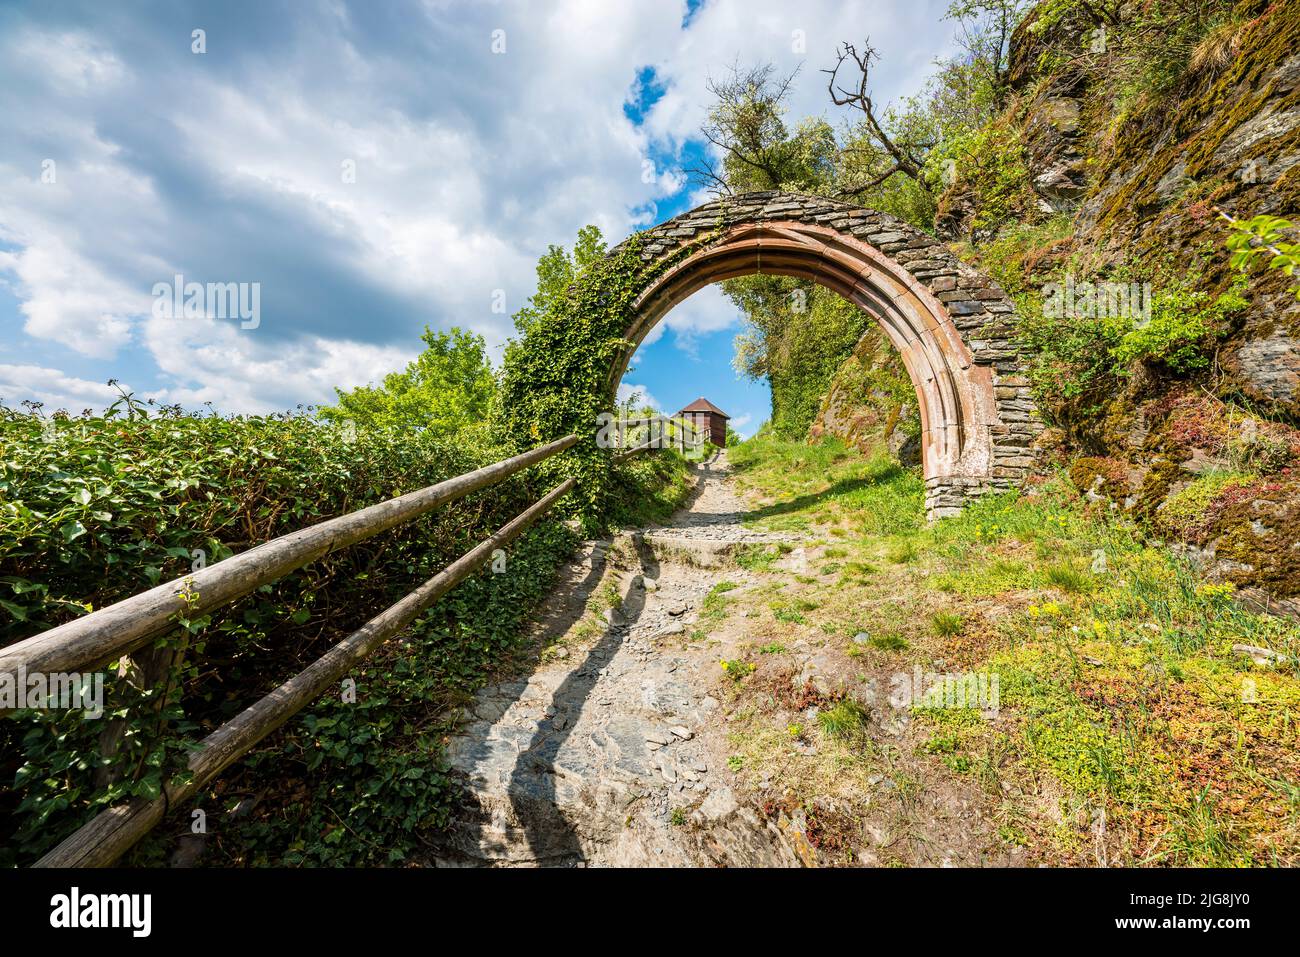 Staircase with archway on the grounds of the Starkenburg Castle ruins, Stock Photo